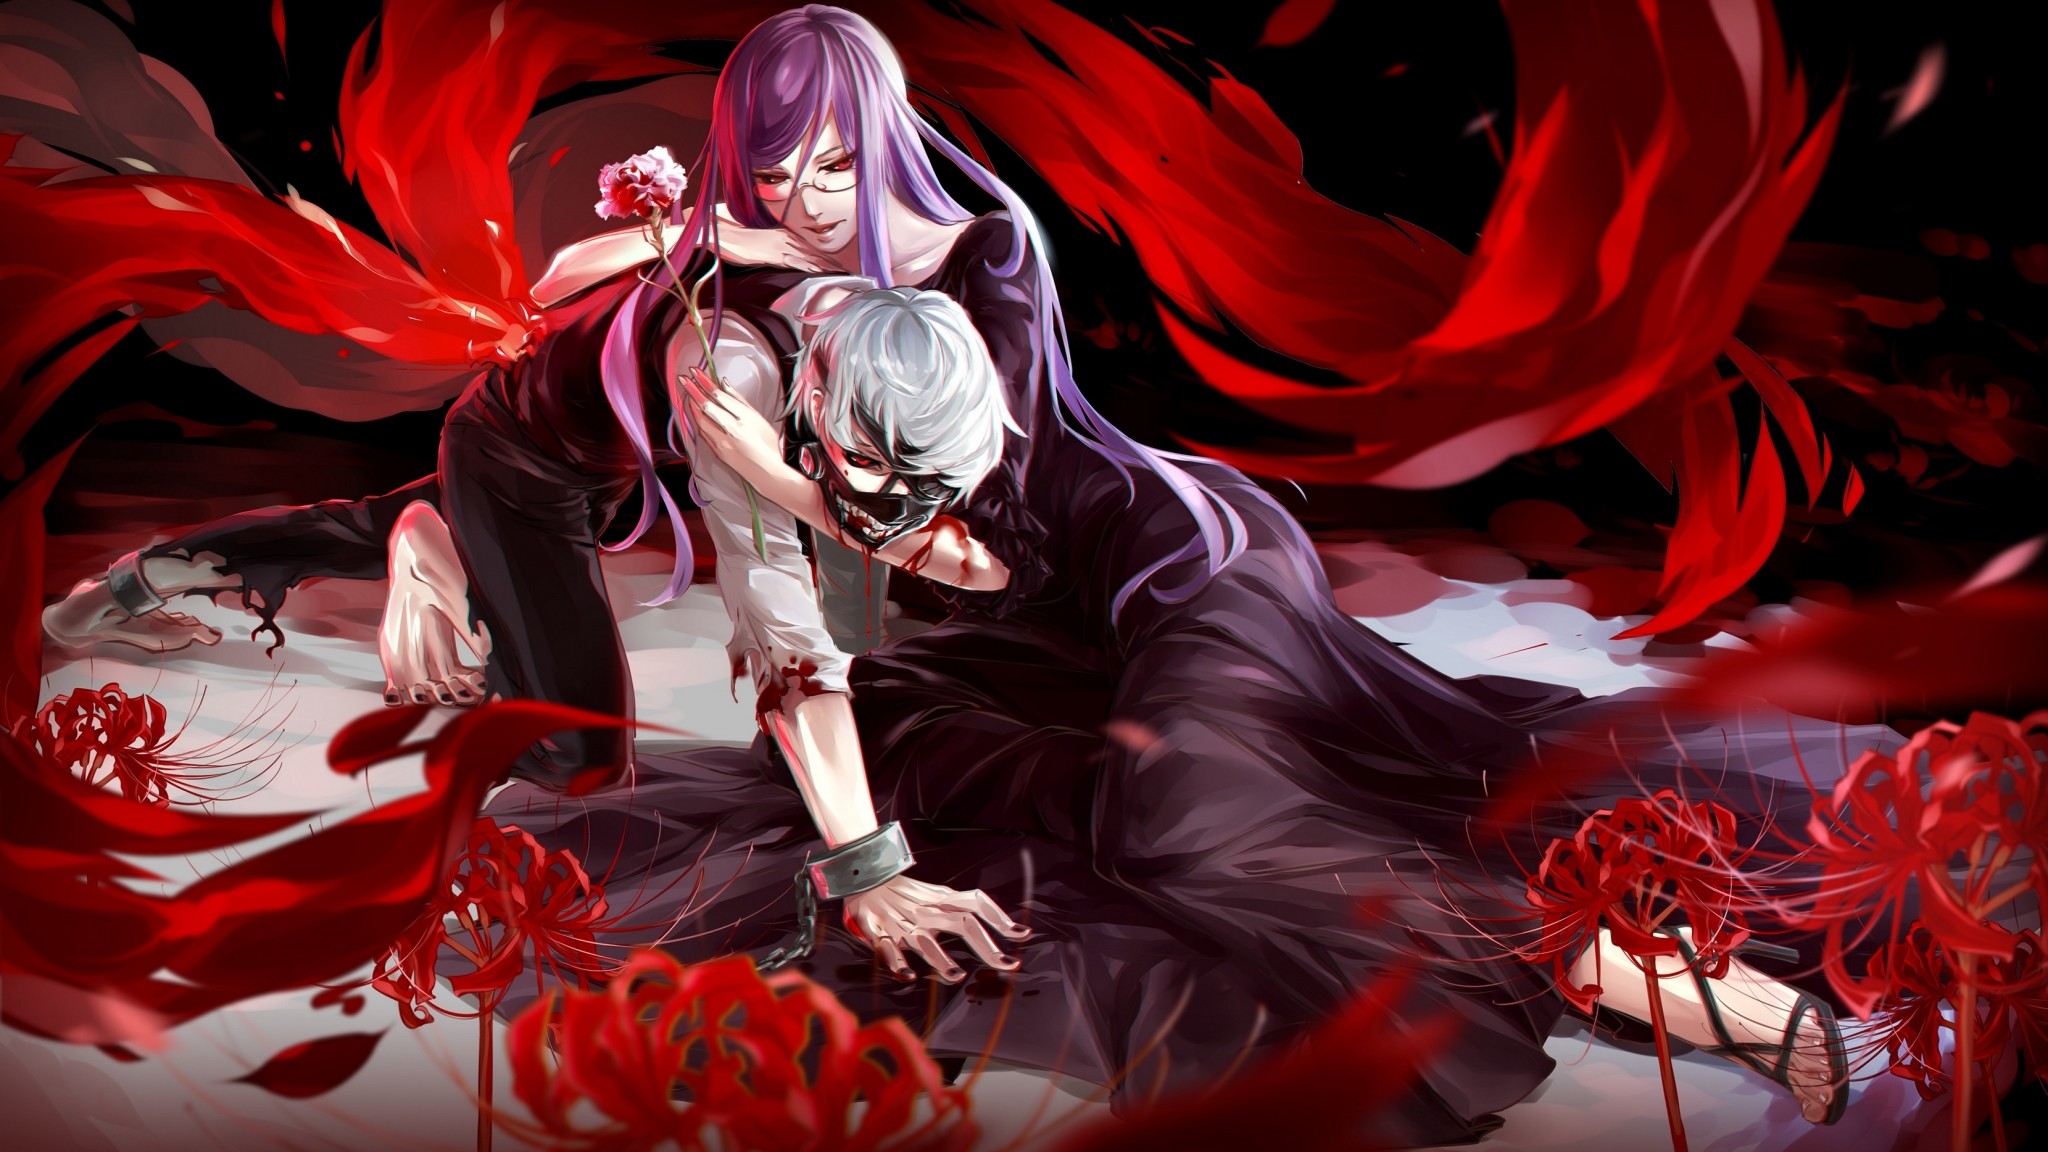 2048x1152 Download Tokyo Ghoul Amazing Anime Christmas Wallpaper In Many Resolutions